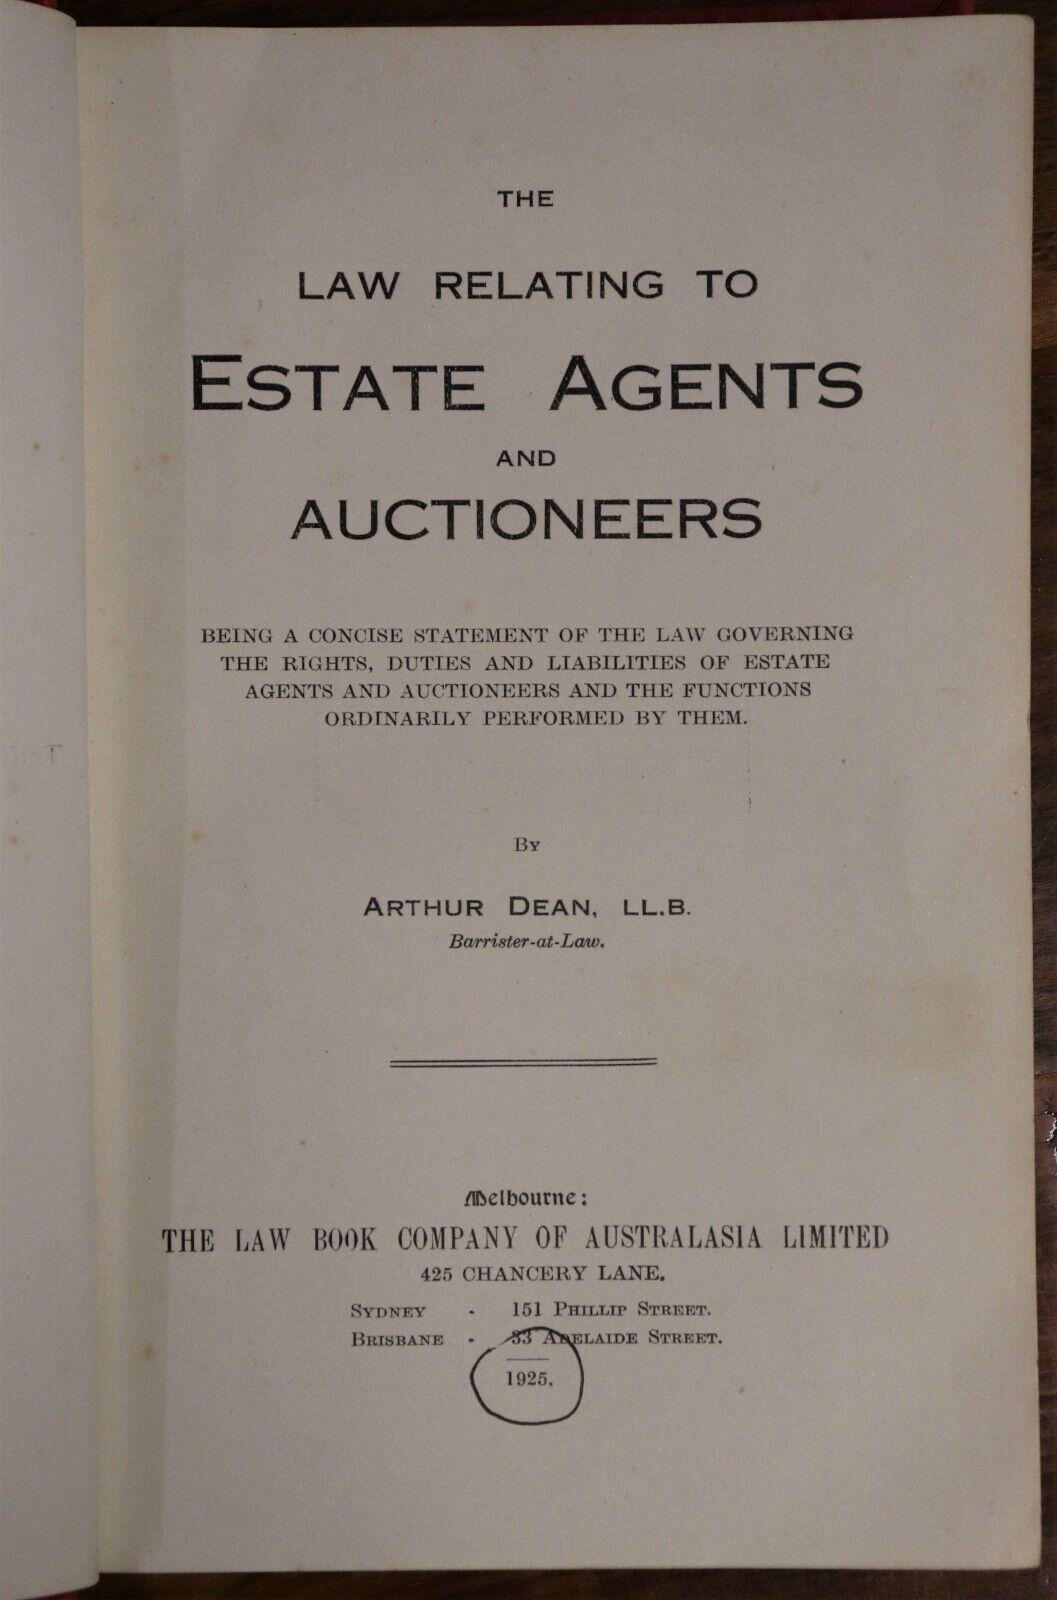 The Law Relating To Estate Agents & Auctioneers - 1925 - Australian History Book